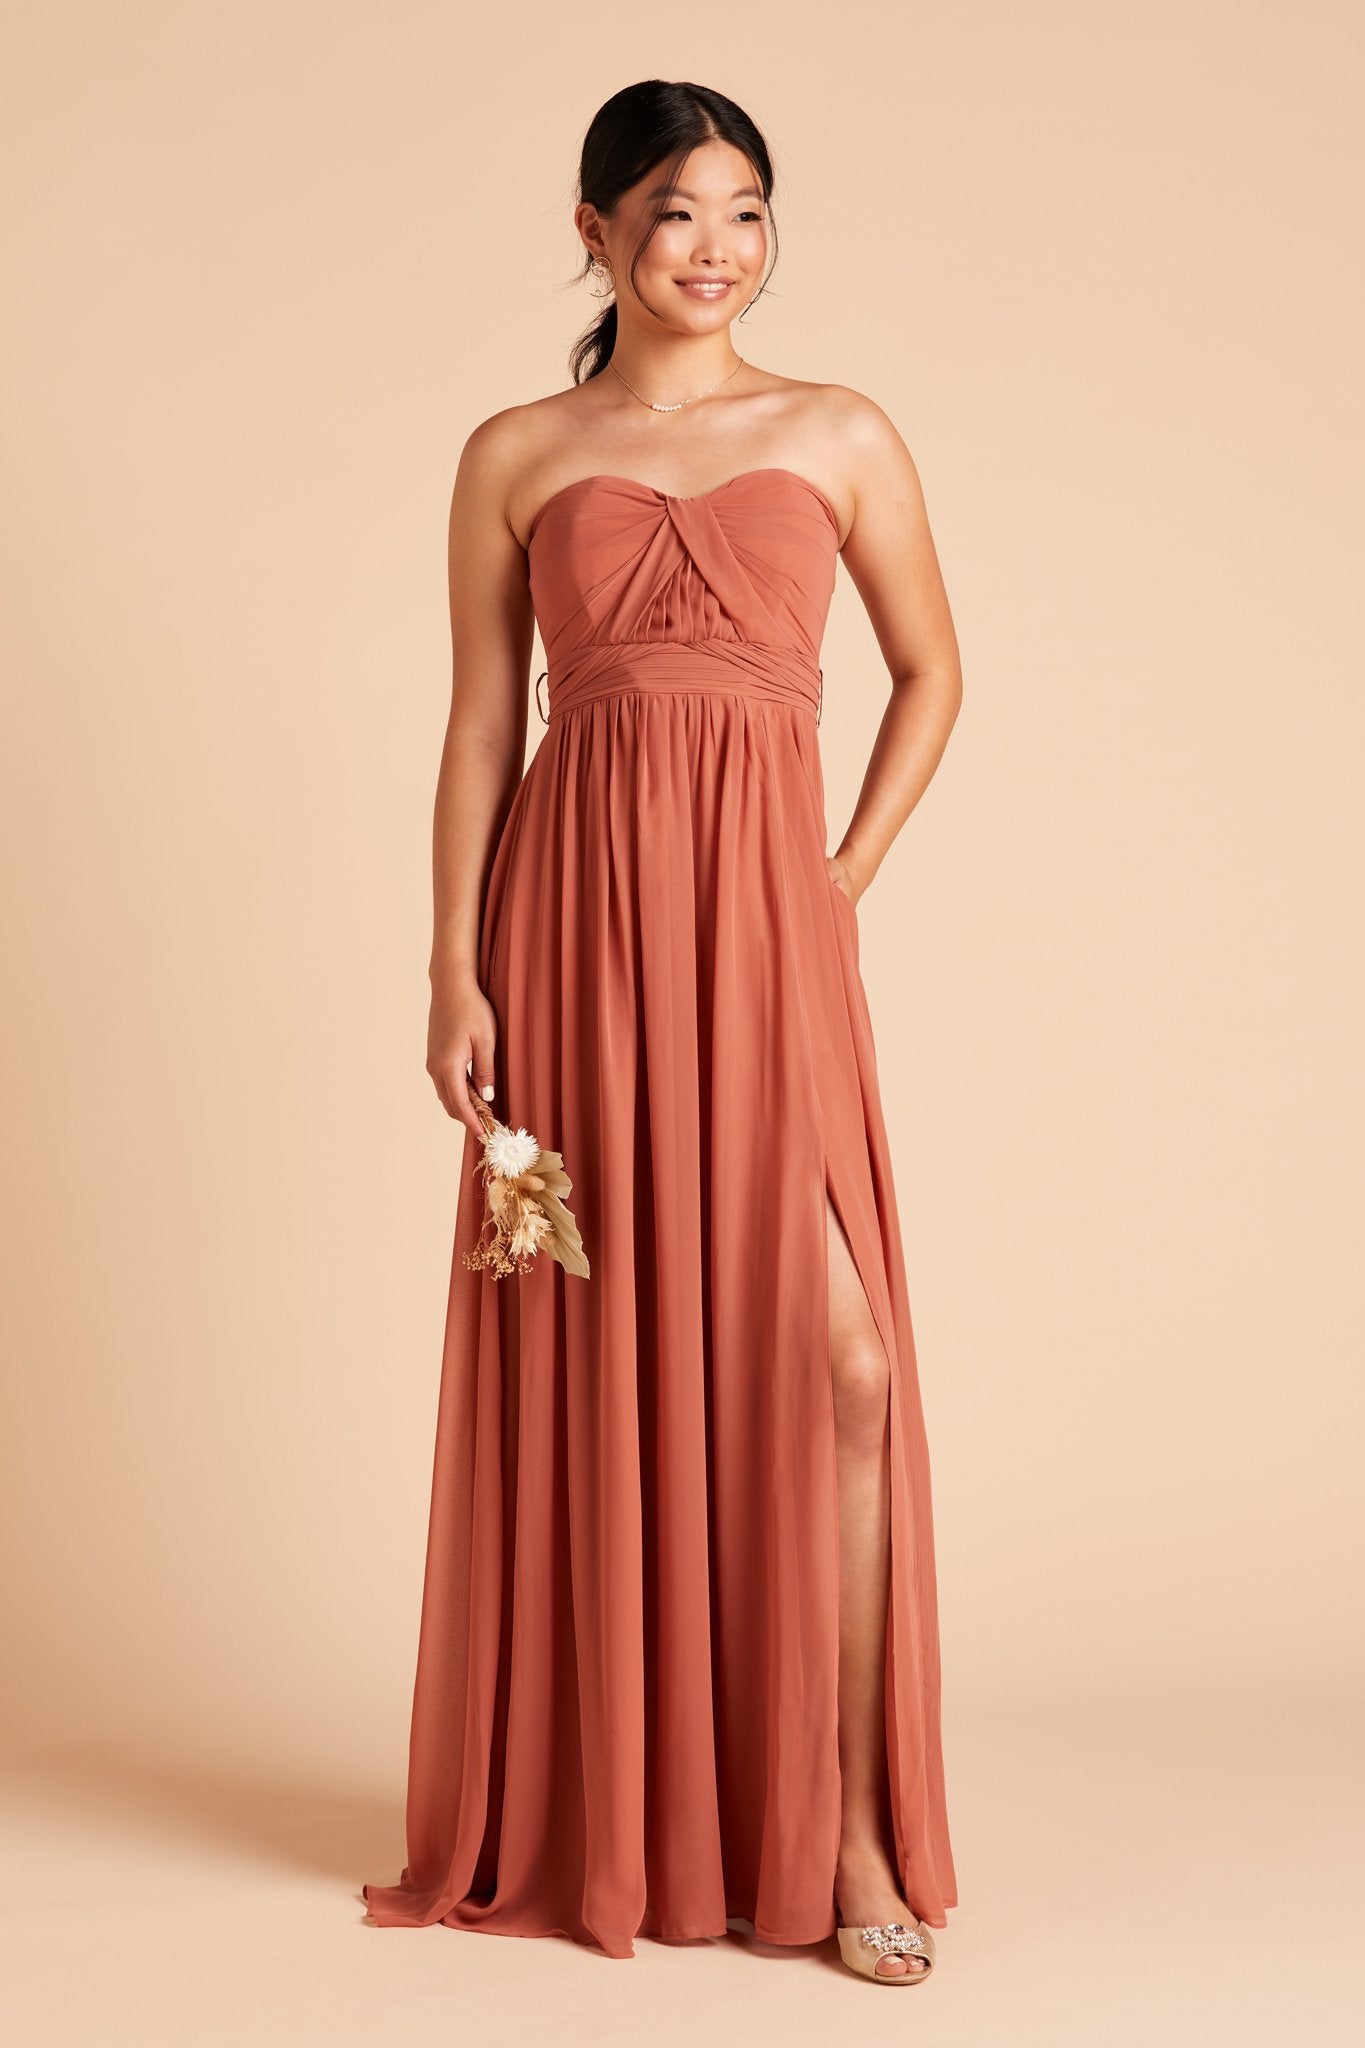 Grace convertible bridesmaid dress in terracotta orange chiffon by Birdy Grey, front view with hand in pocket